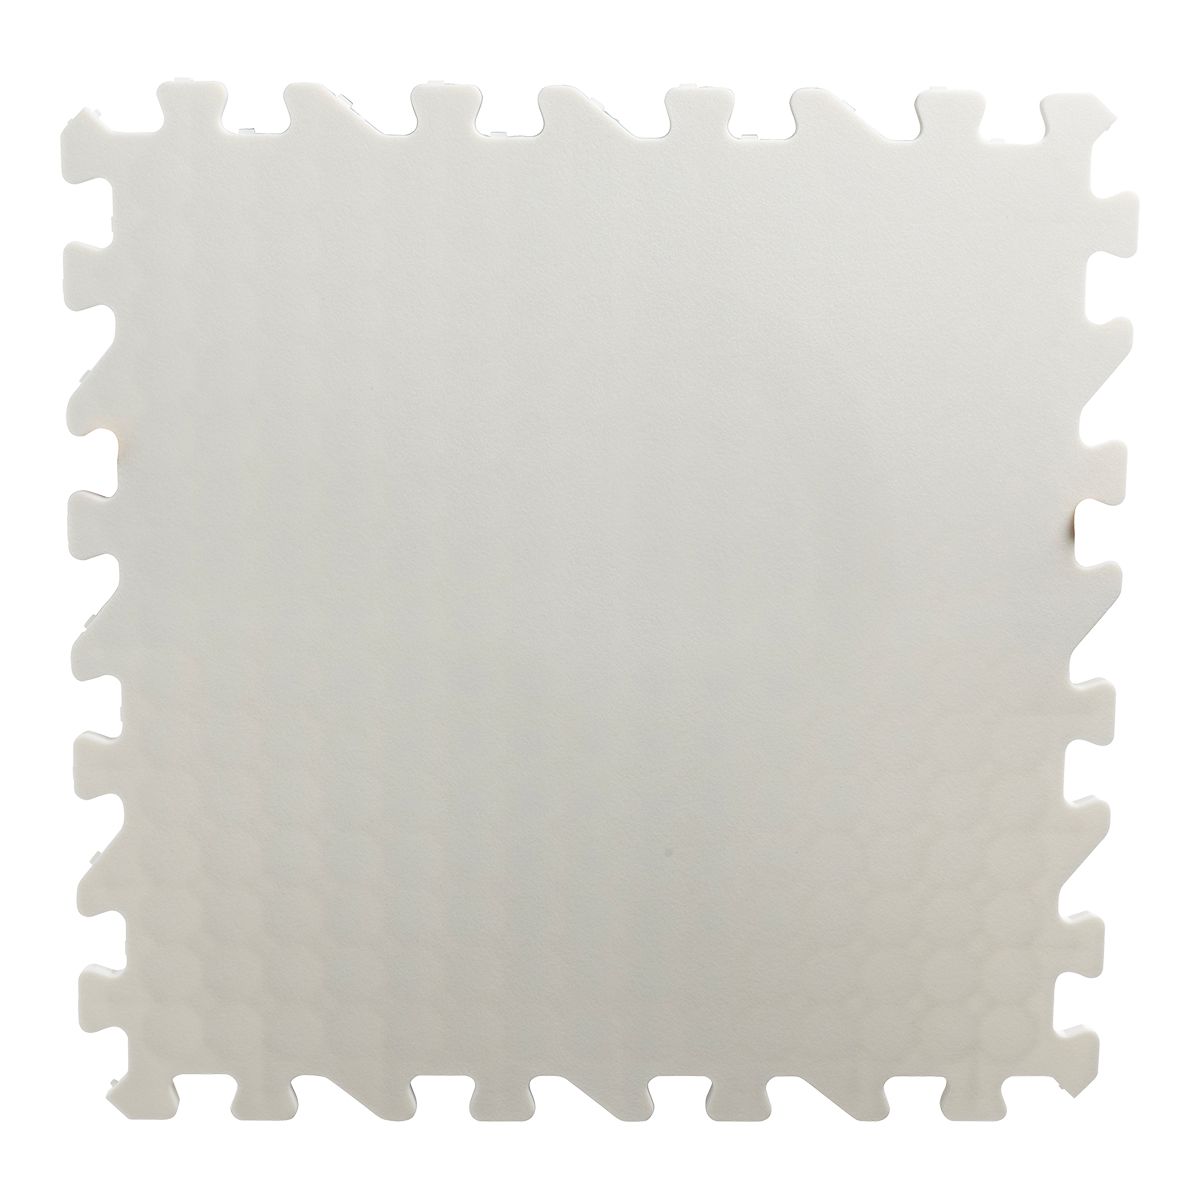 Image of Bauer Synthetic Ice Tiles - 5 Pack